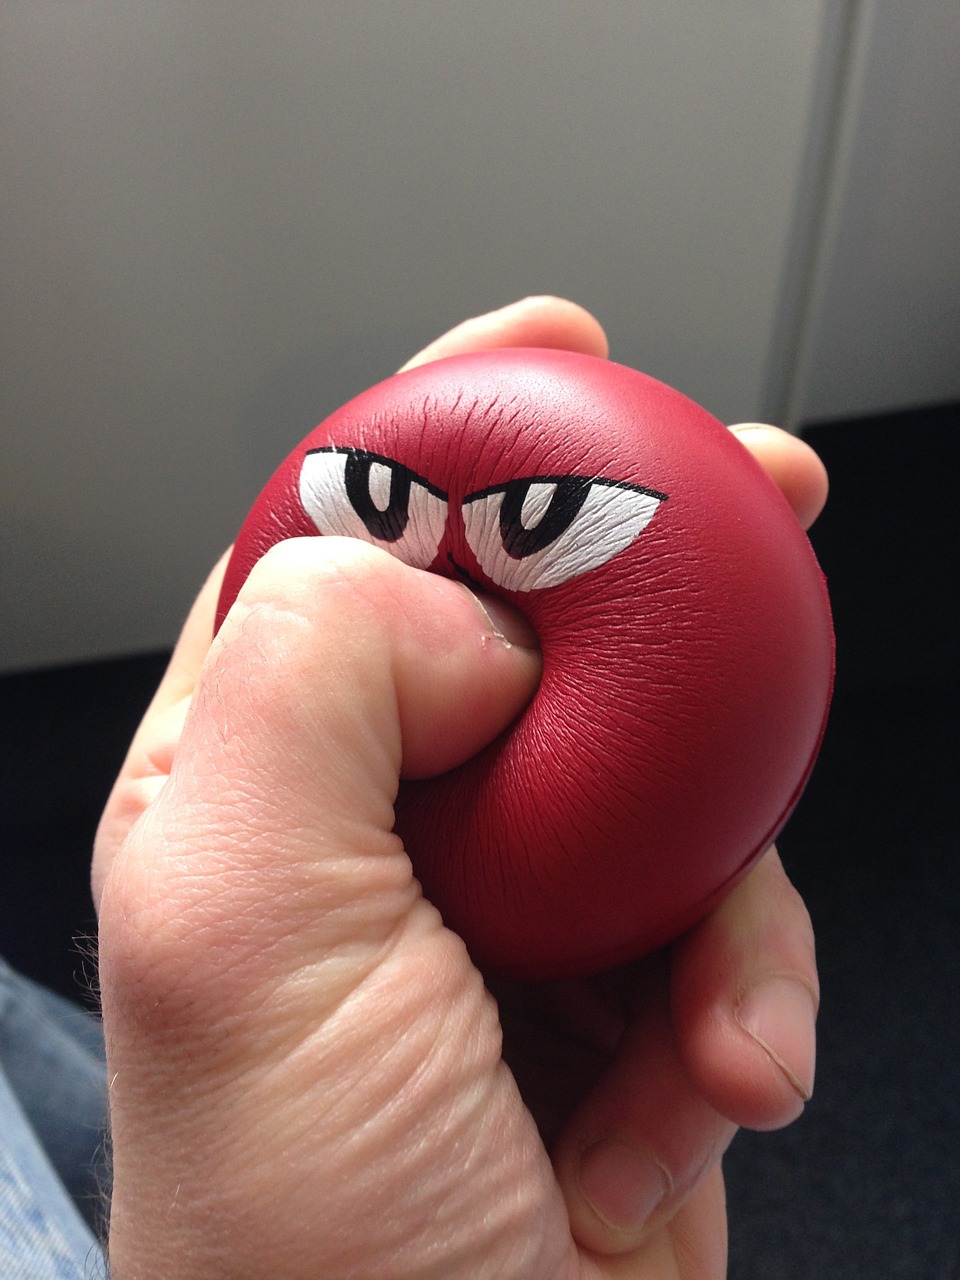 10 Funny Stress Balls that are Oddly Satisfying - Stuff On The Internet